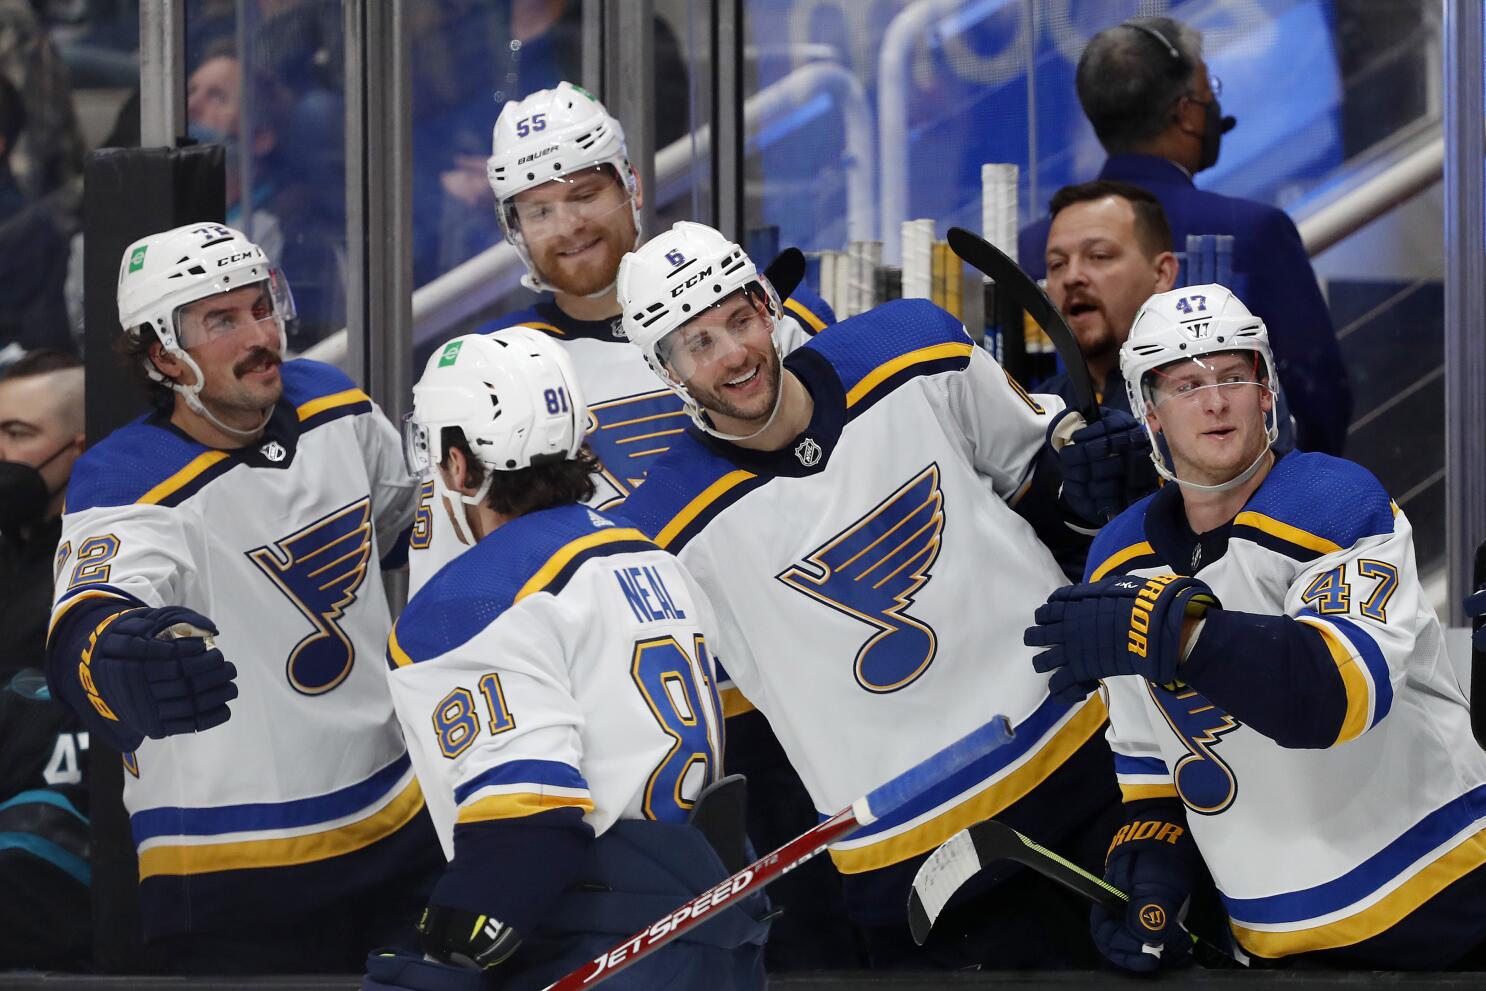 Ryan O'Reilly handed an 'A' on his St. Louis Blues sweater